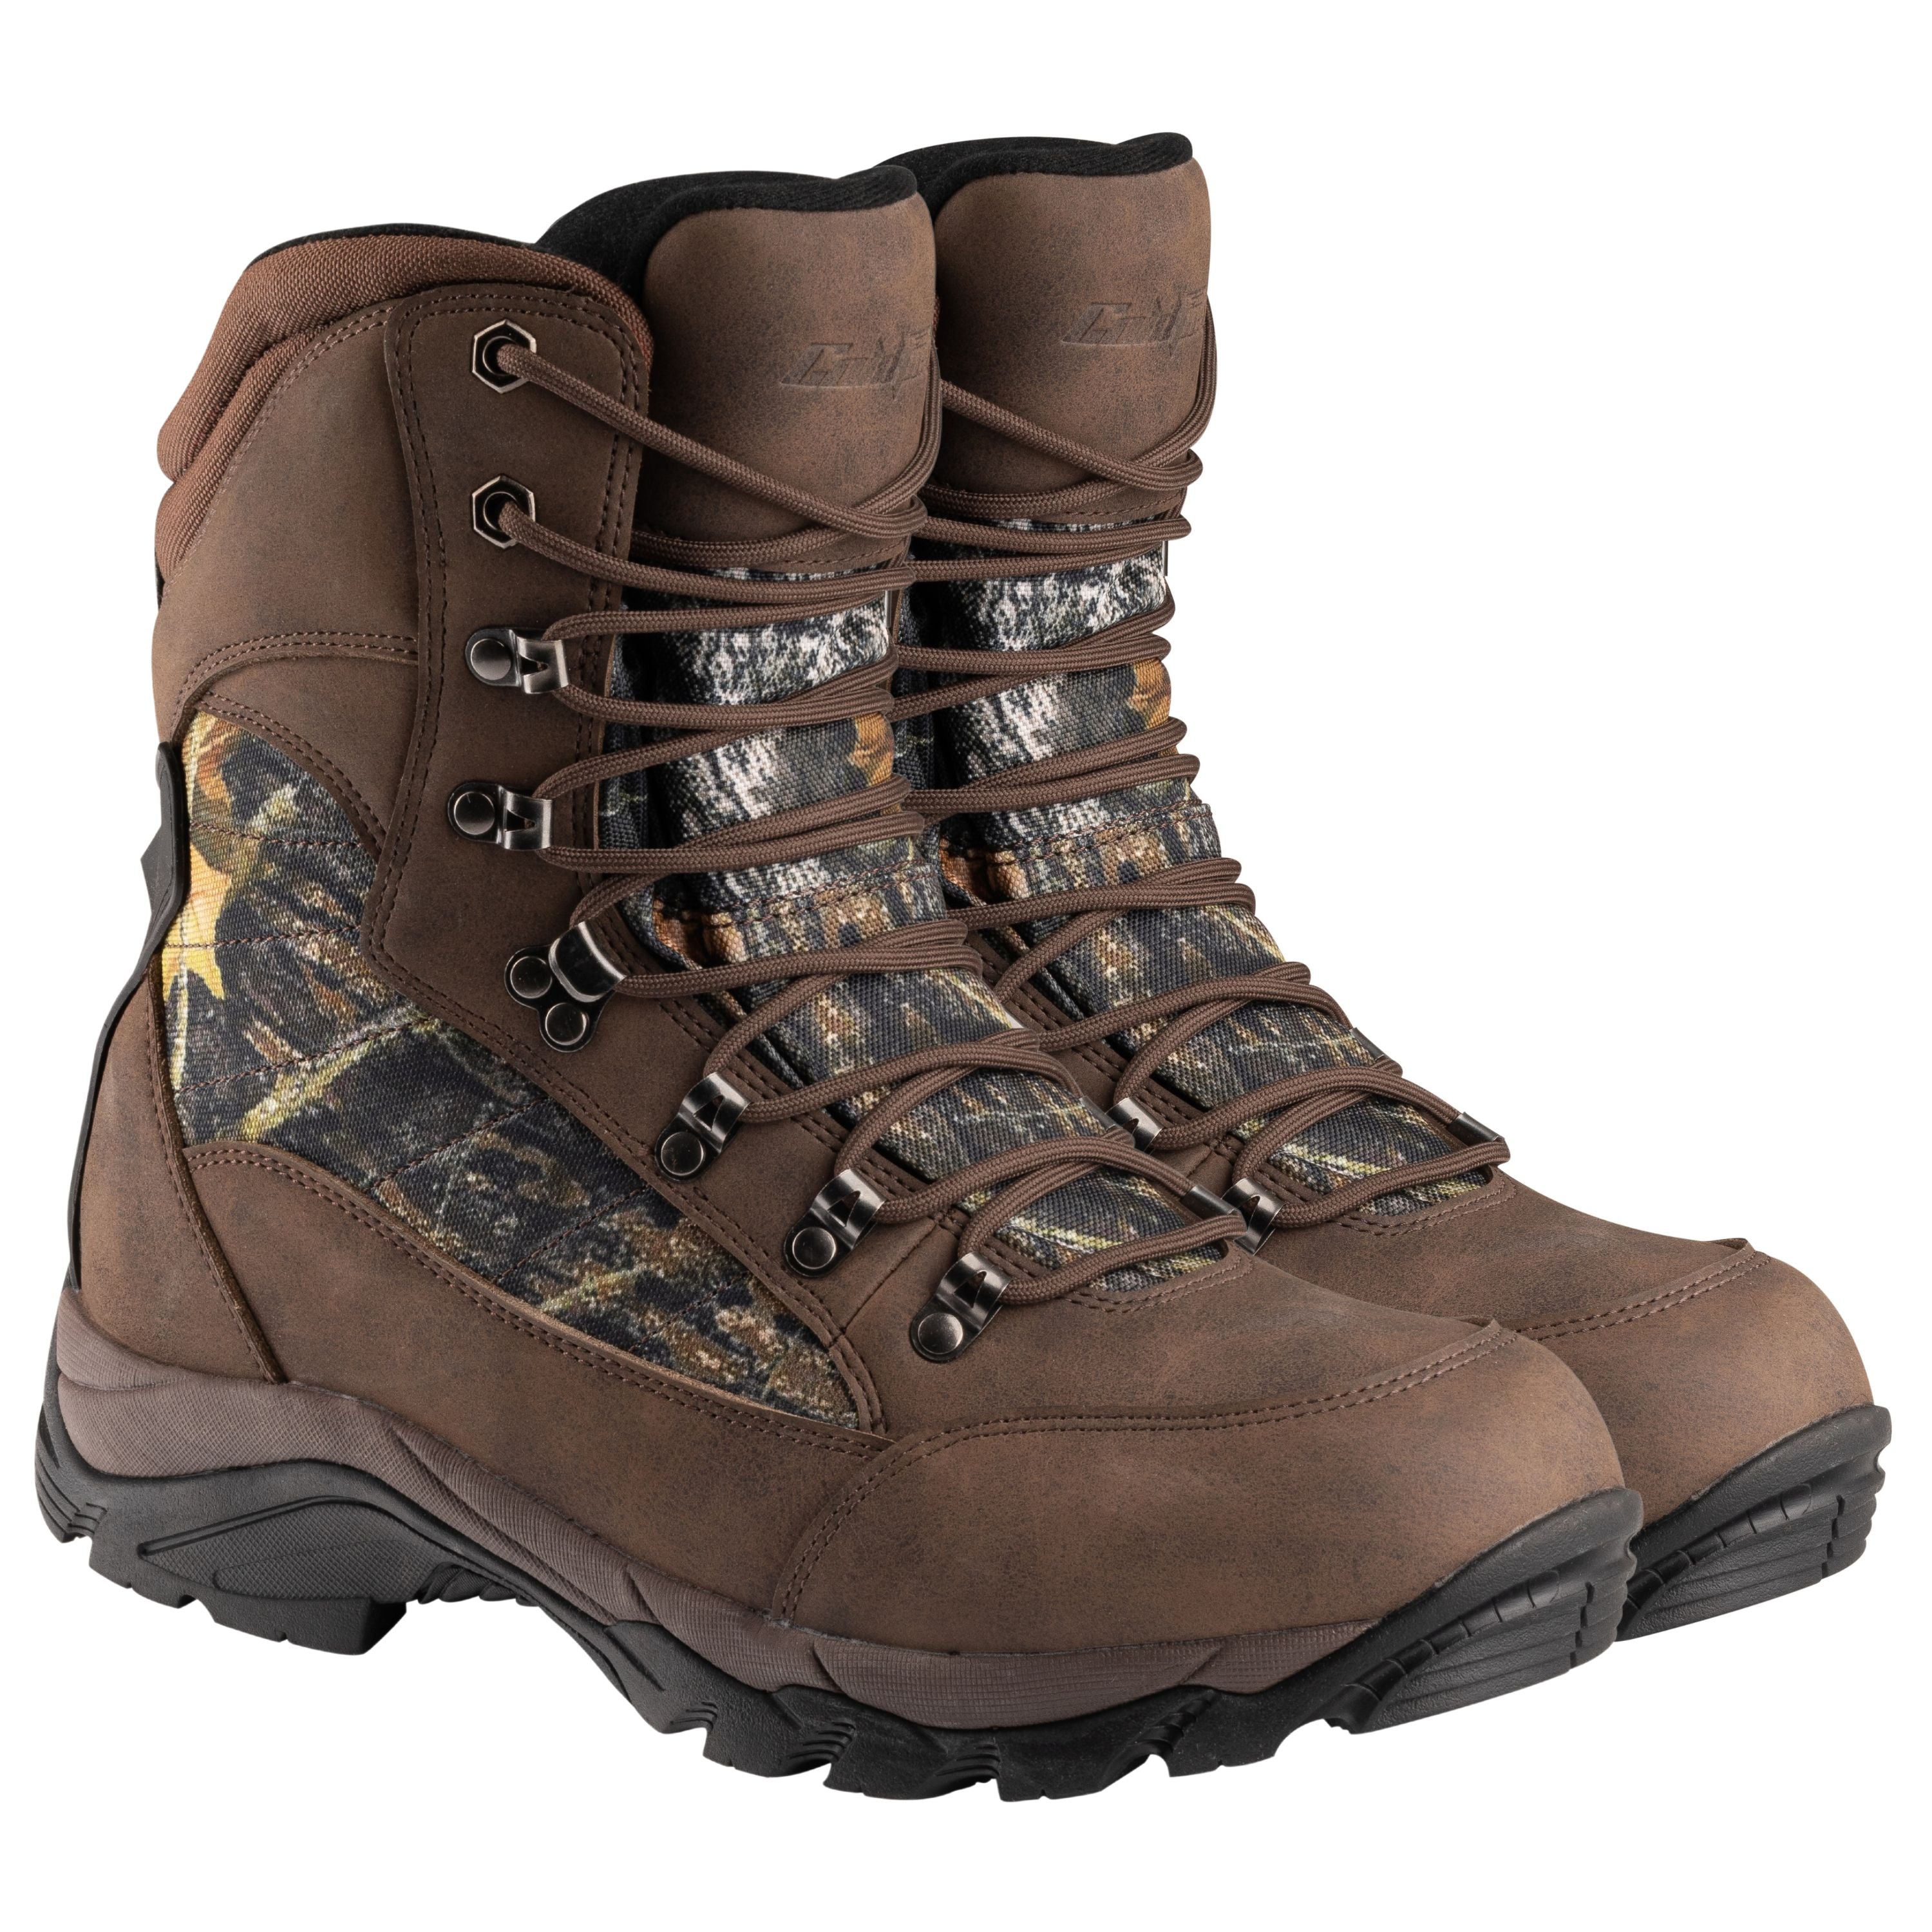 "Summit" Thinsulate boots - Men’s